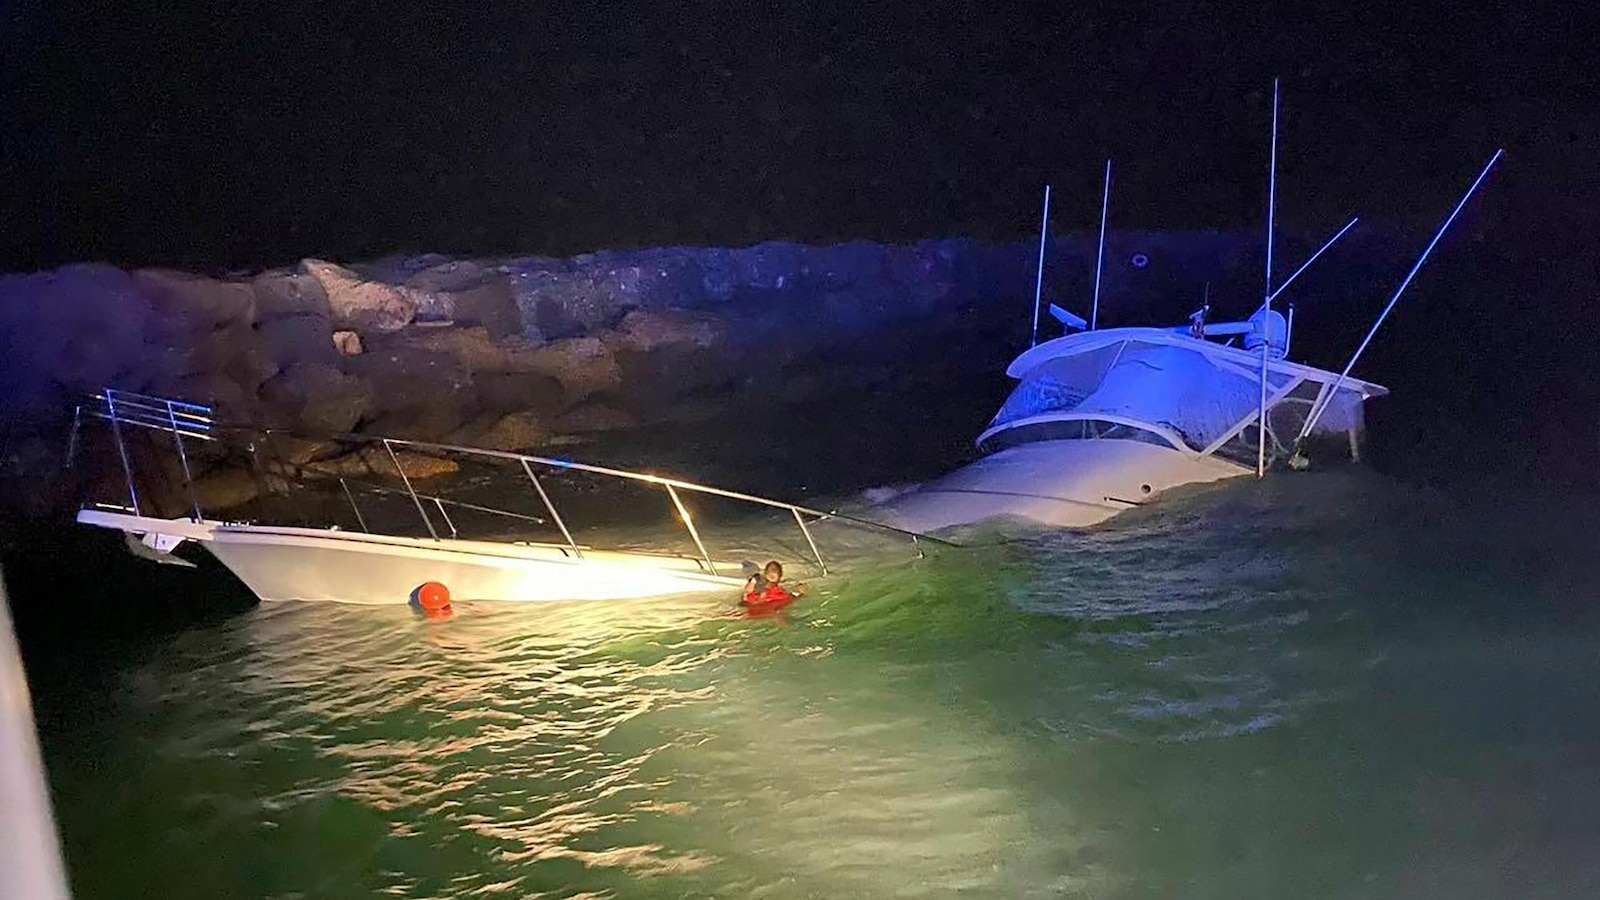 Fatal Crash Involving Power Boat and Jetty in Southern California Results in 1 Fatality and 10 Injuries